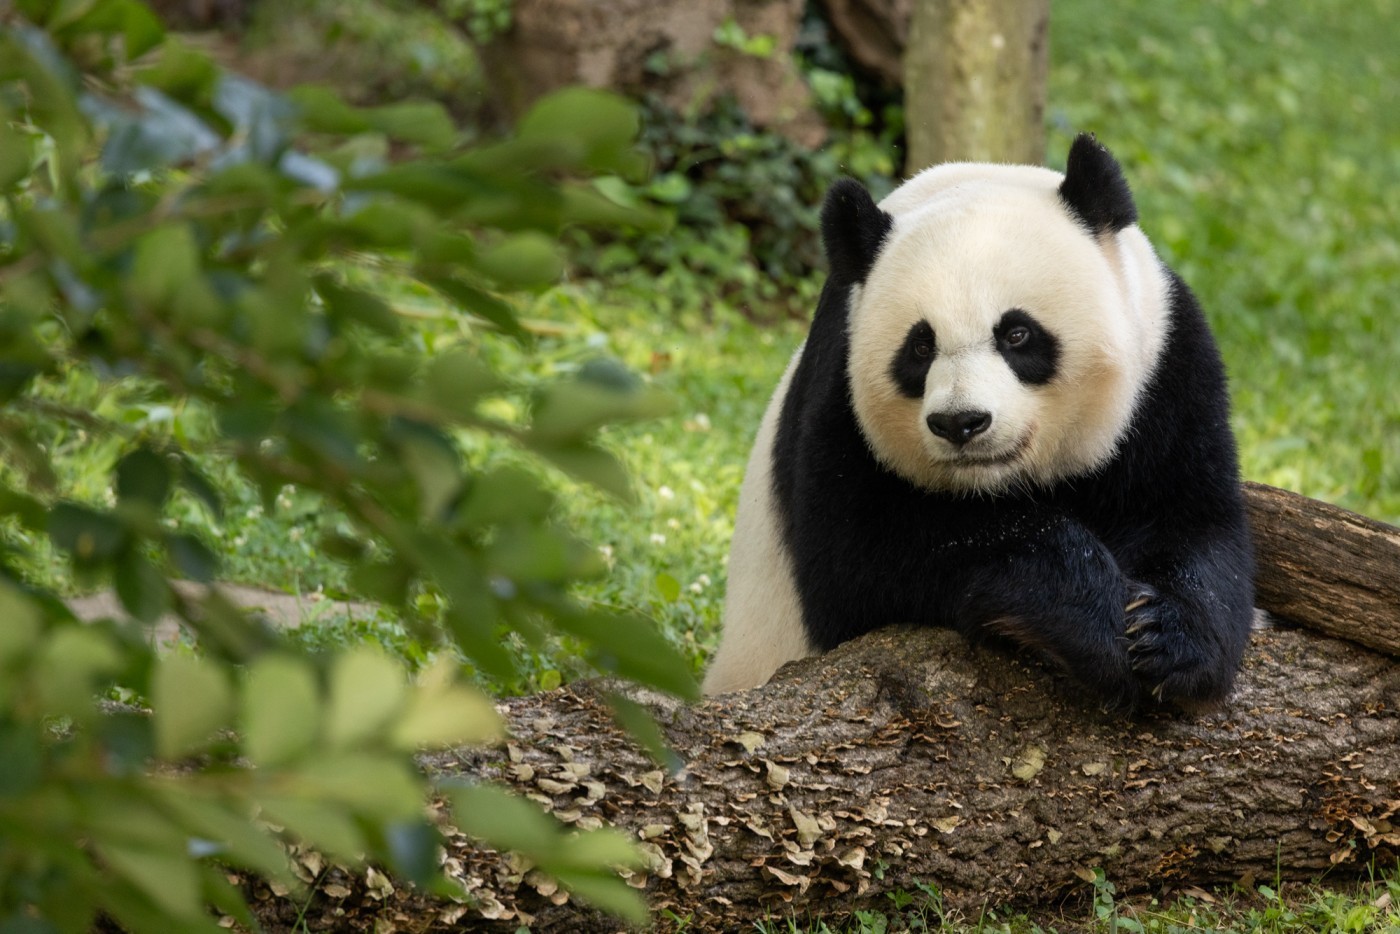 National Zoo's giant pandas fly home amid uncertainty about future